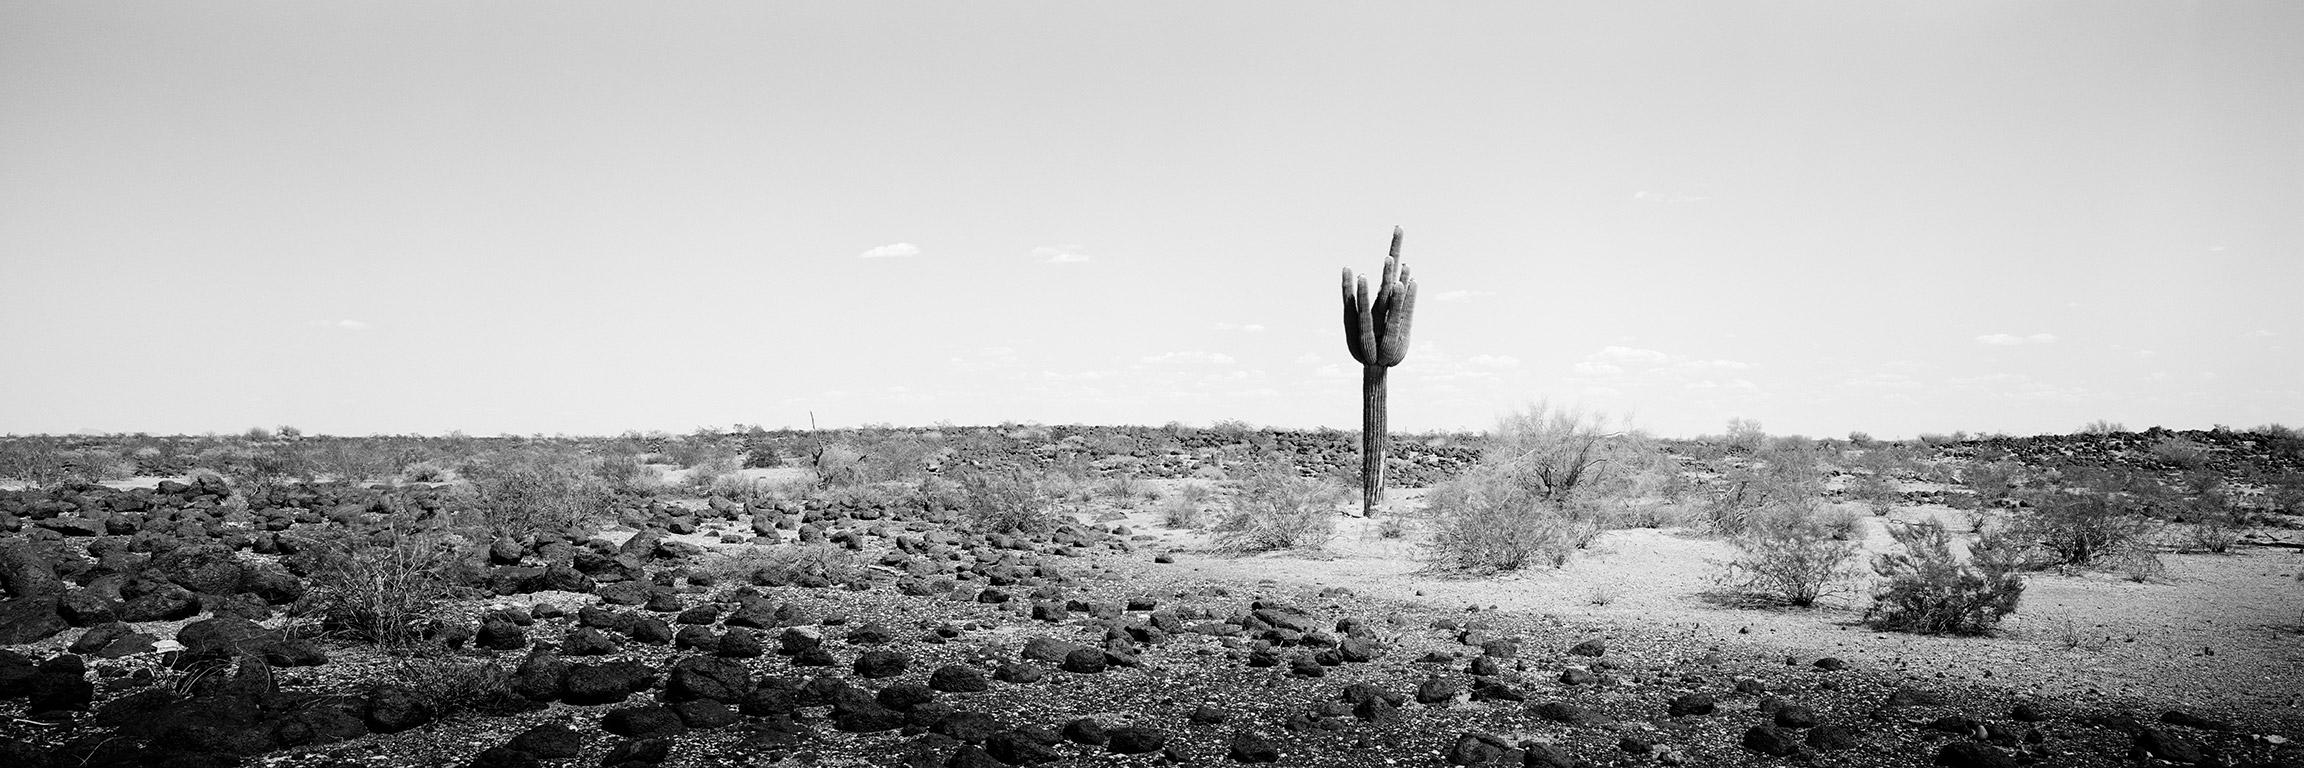 Gerald Berghammer Black and White Photograph - The last One Panorama, Cactus, AZ, USA, black and white photography, landscape